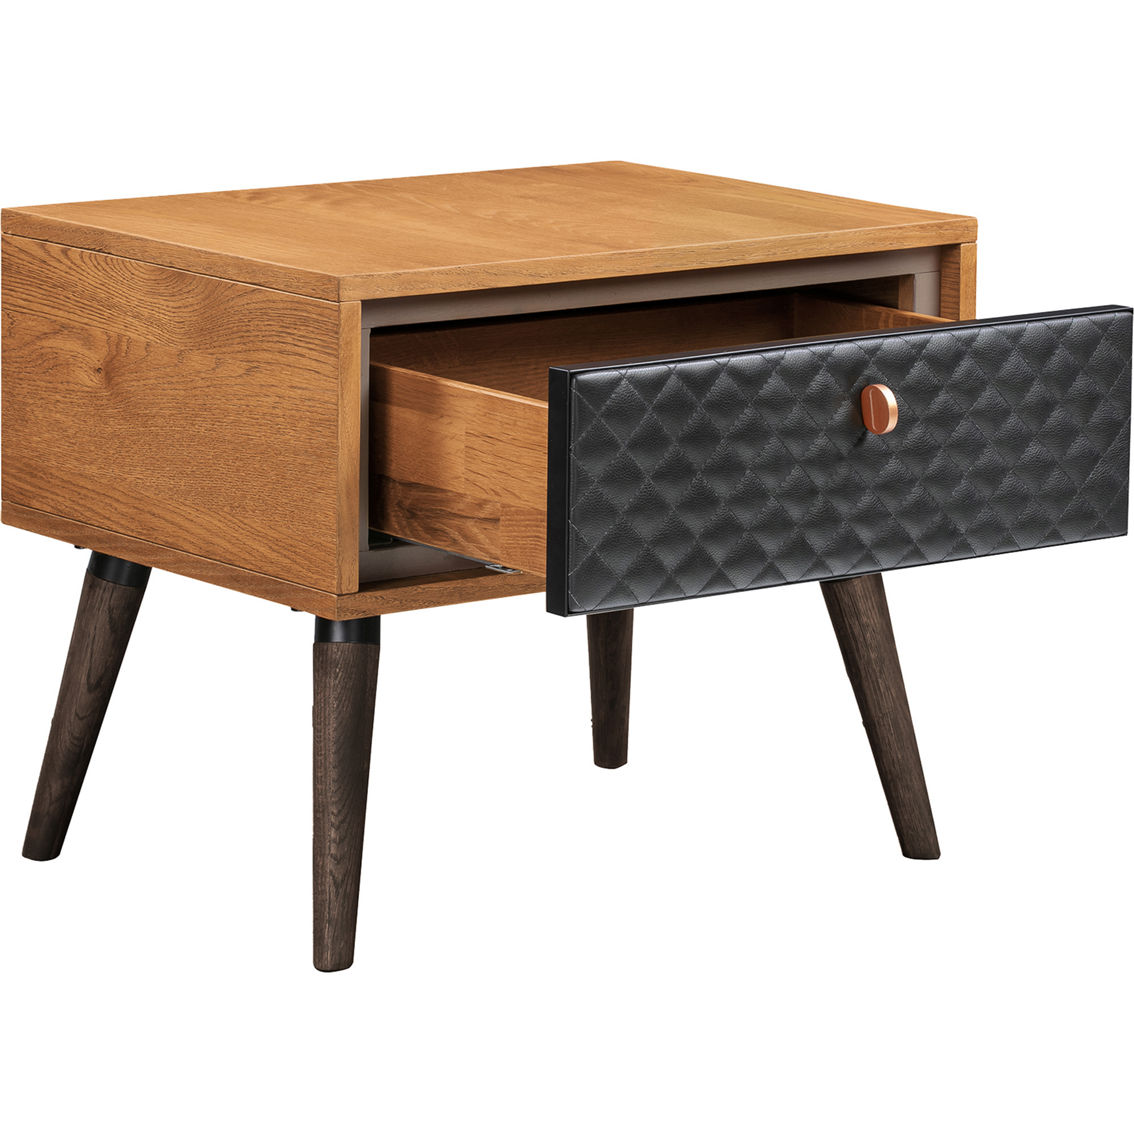 Armen Living Coco Rustic Single Drawer Oak Wood and Faux Leather Nightstand - Image 3 of 6